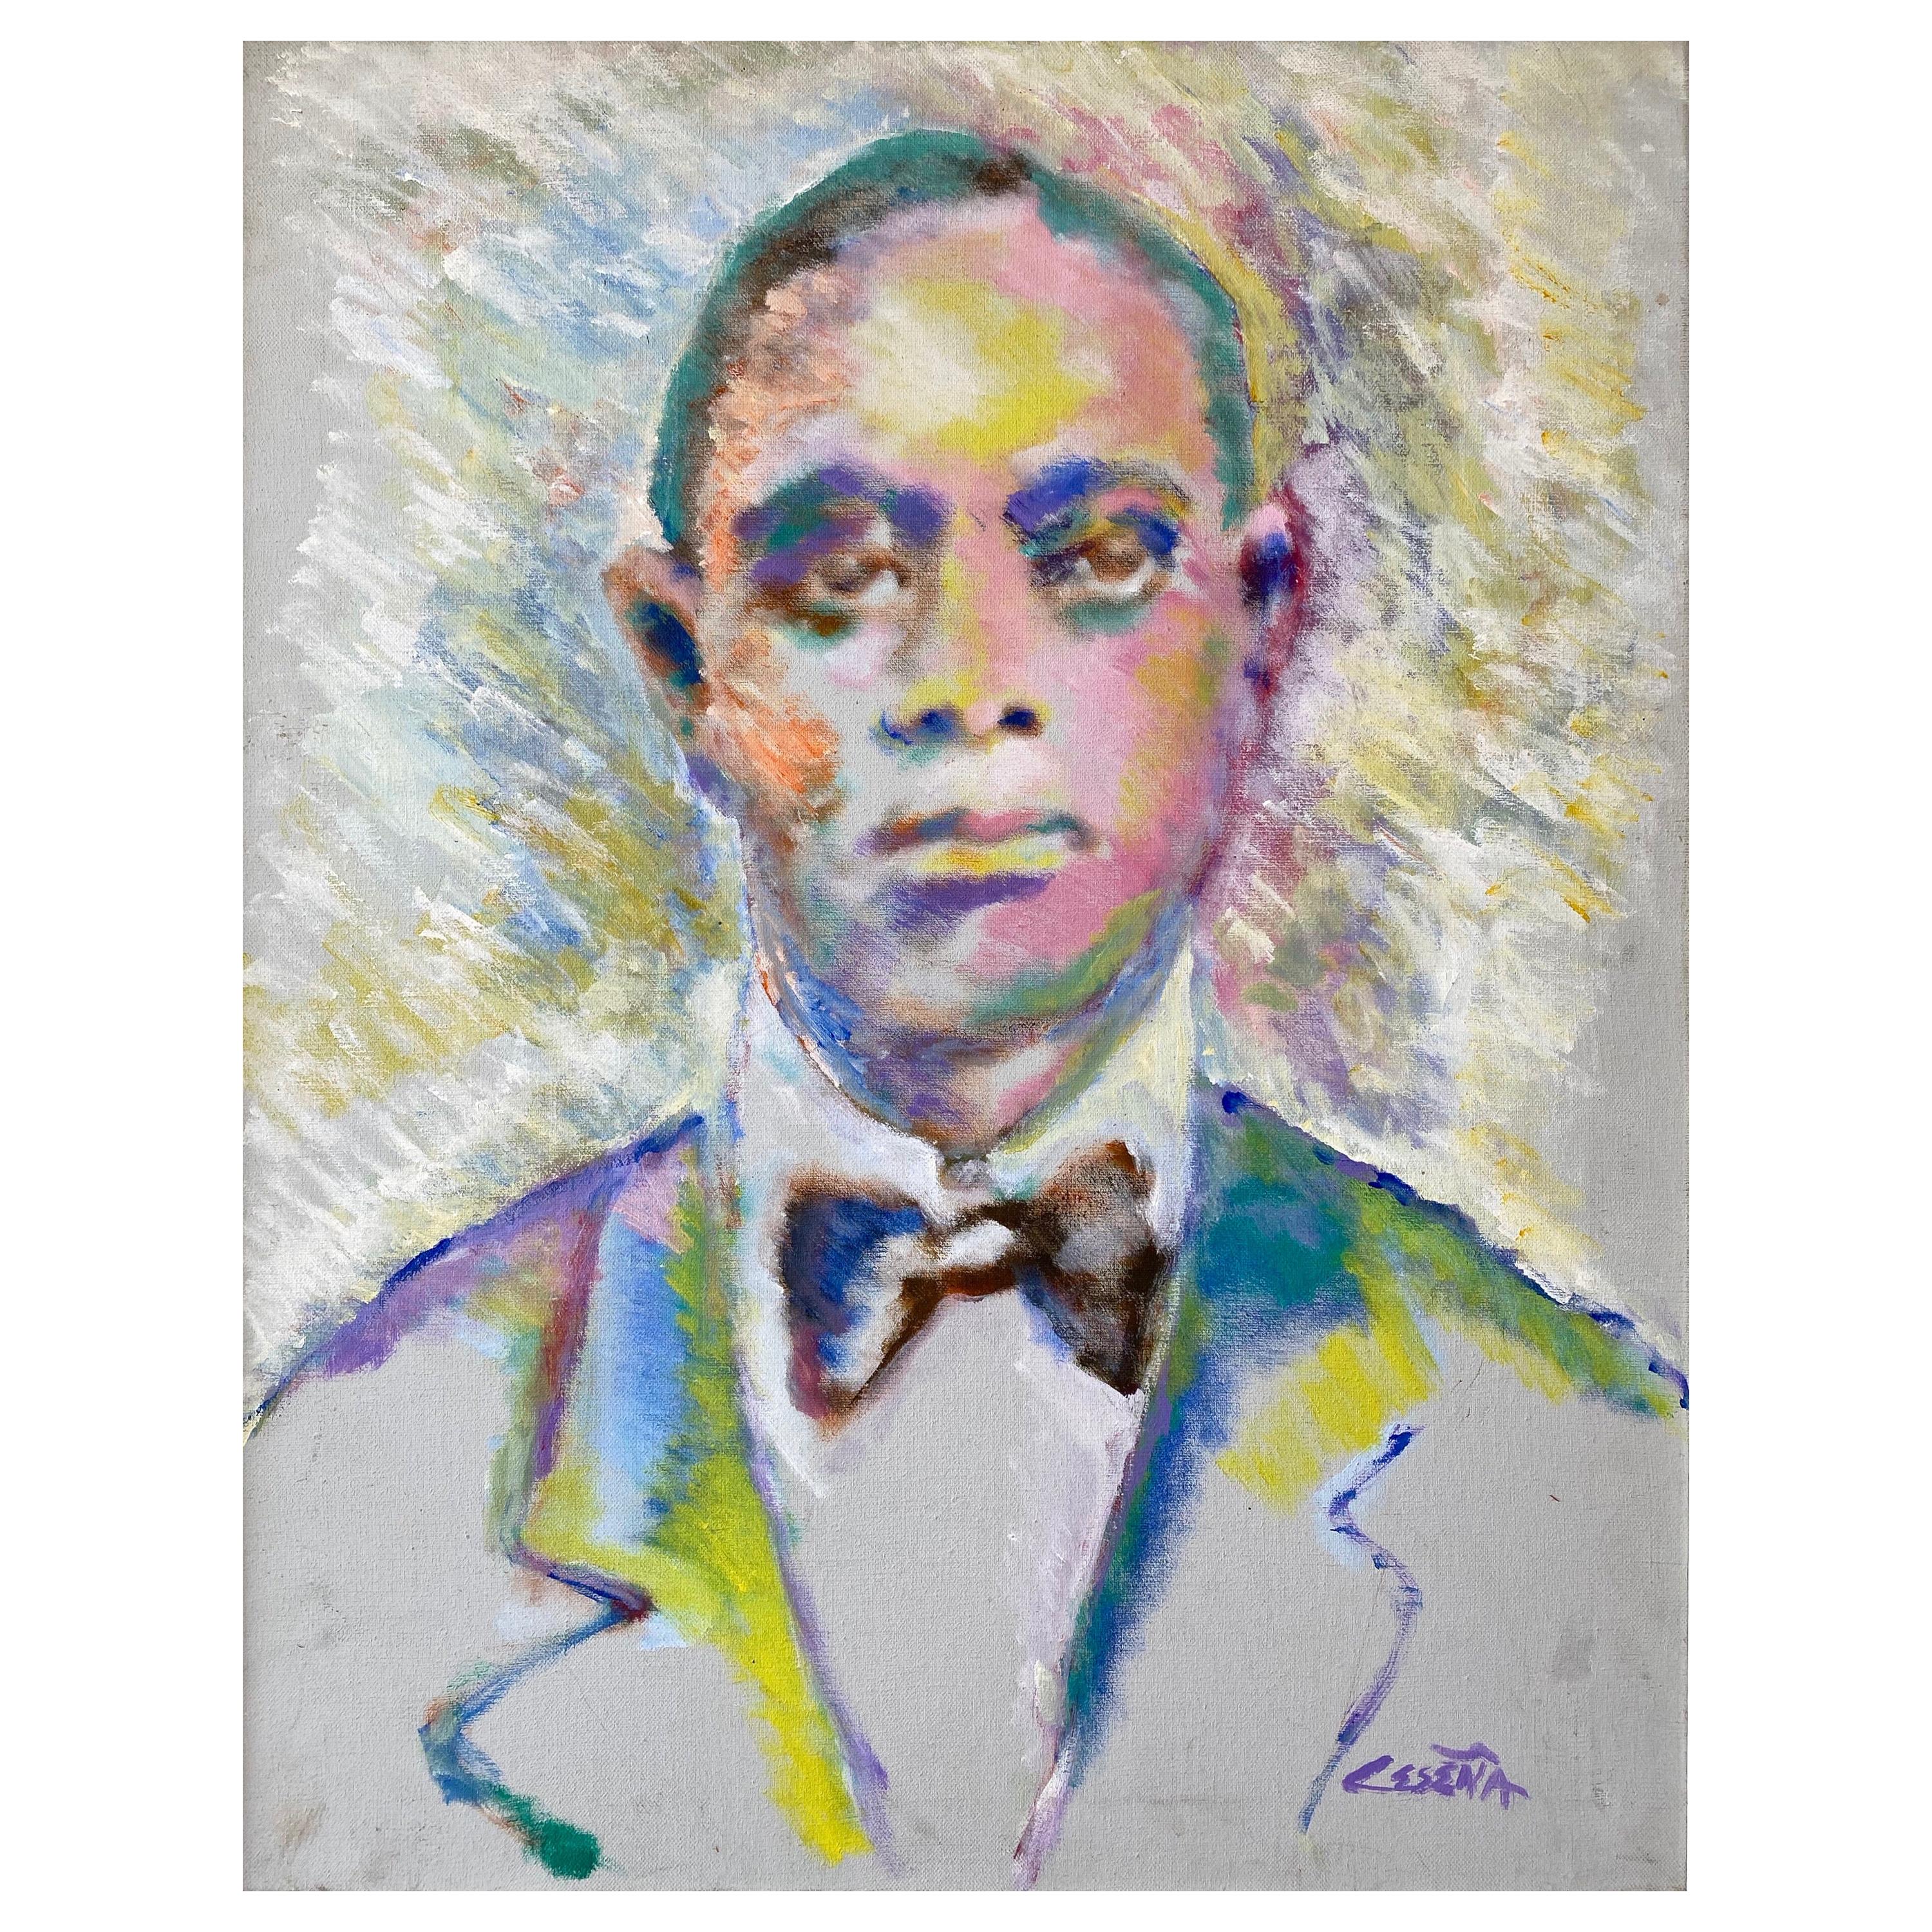 Ed Ceseña “King Oliver”, Large Fauvist Portrait Oil Painting, 1980s For Sale